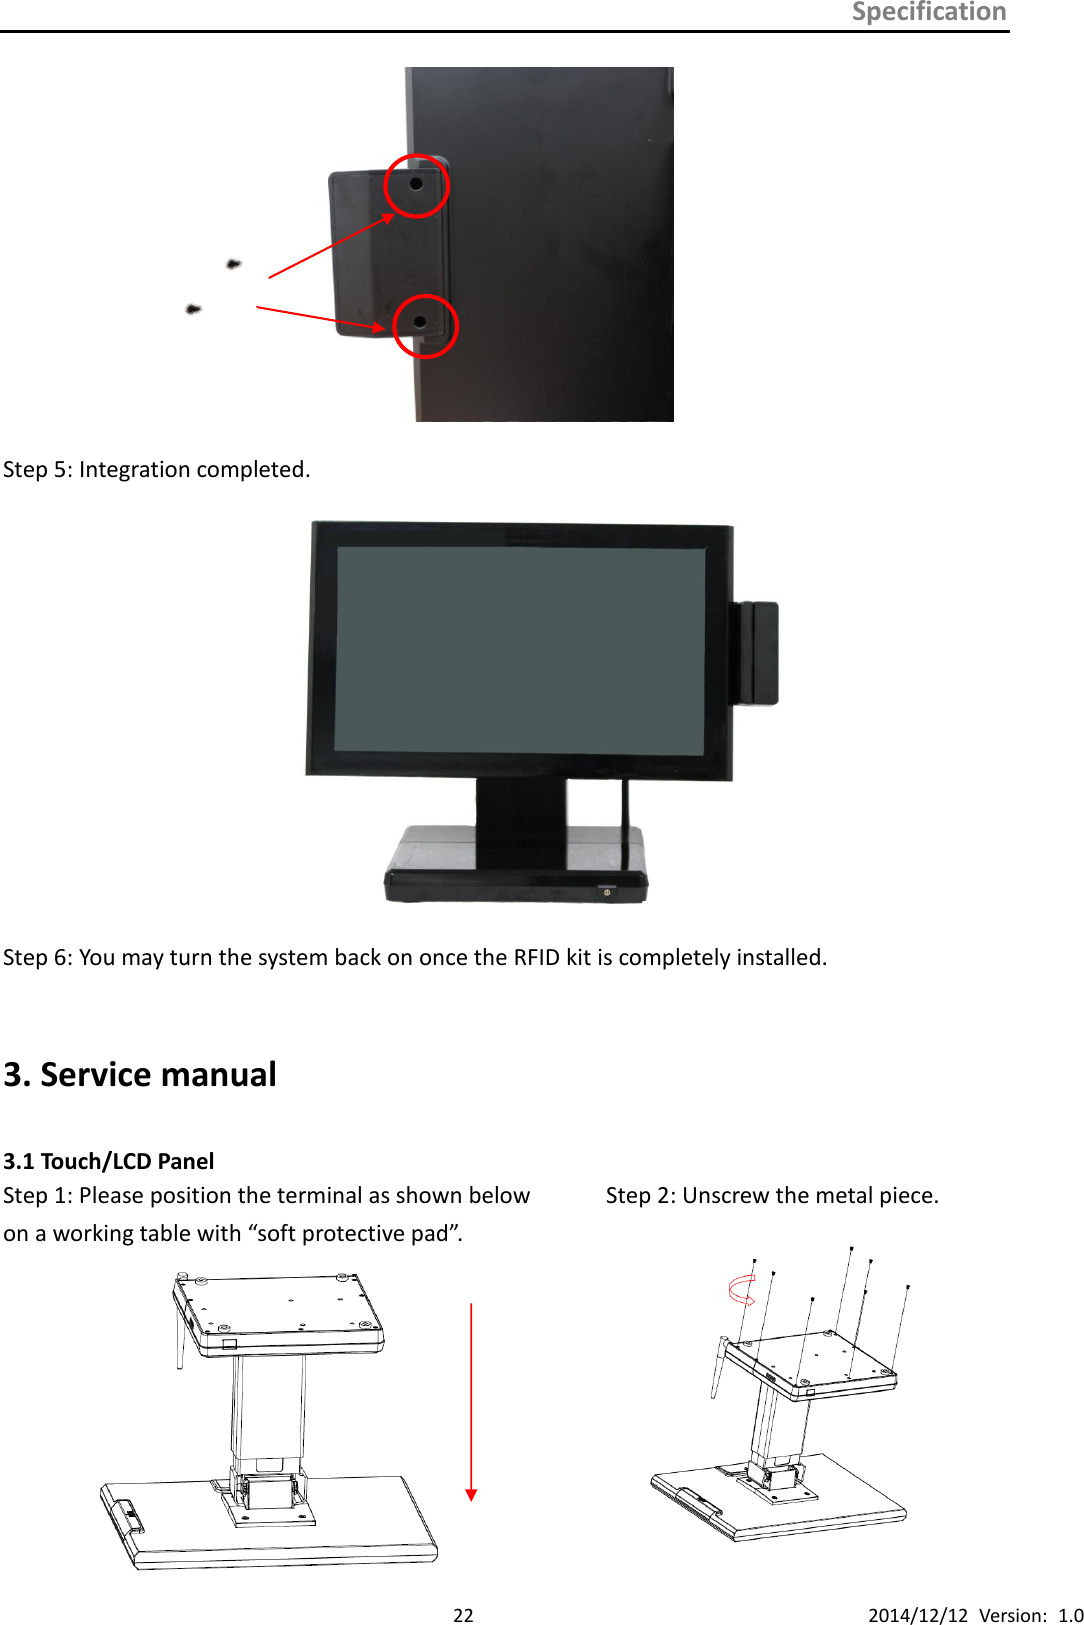 Specification      22 2014/12/12  Version:  1.0  Step 5: Integration completed.  Step 6: You may turn the system back on once the RFID kit is completely installed.  3. Service manual  3.1 Touch/LCD Panel Step 1: Please position the terminal as shown below         Step 2: Unscrew the metal piece.   on a working table with “soft protective pad”.                  